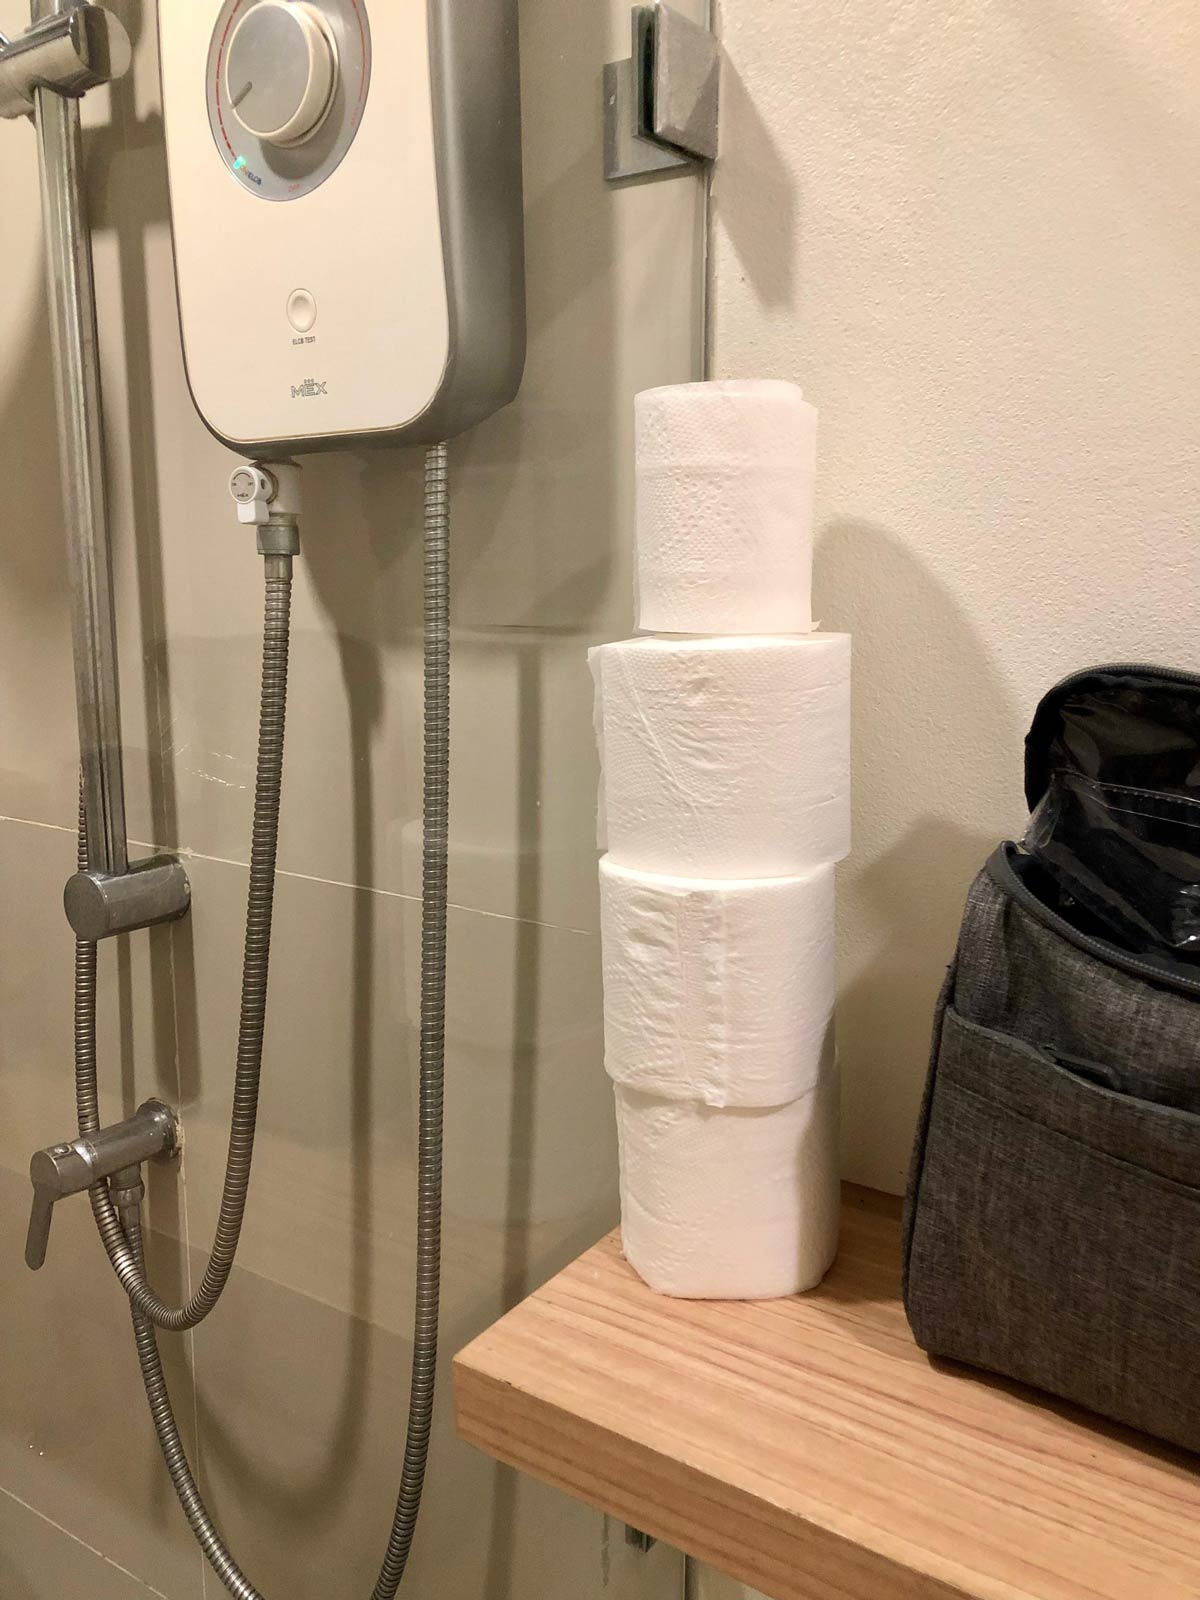 The hotel I’m staying in keeps adding a new roll of toilet paper every day even though I’m not using any